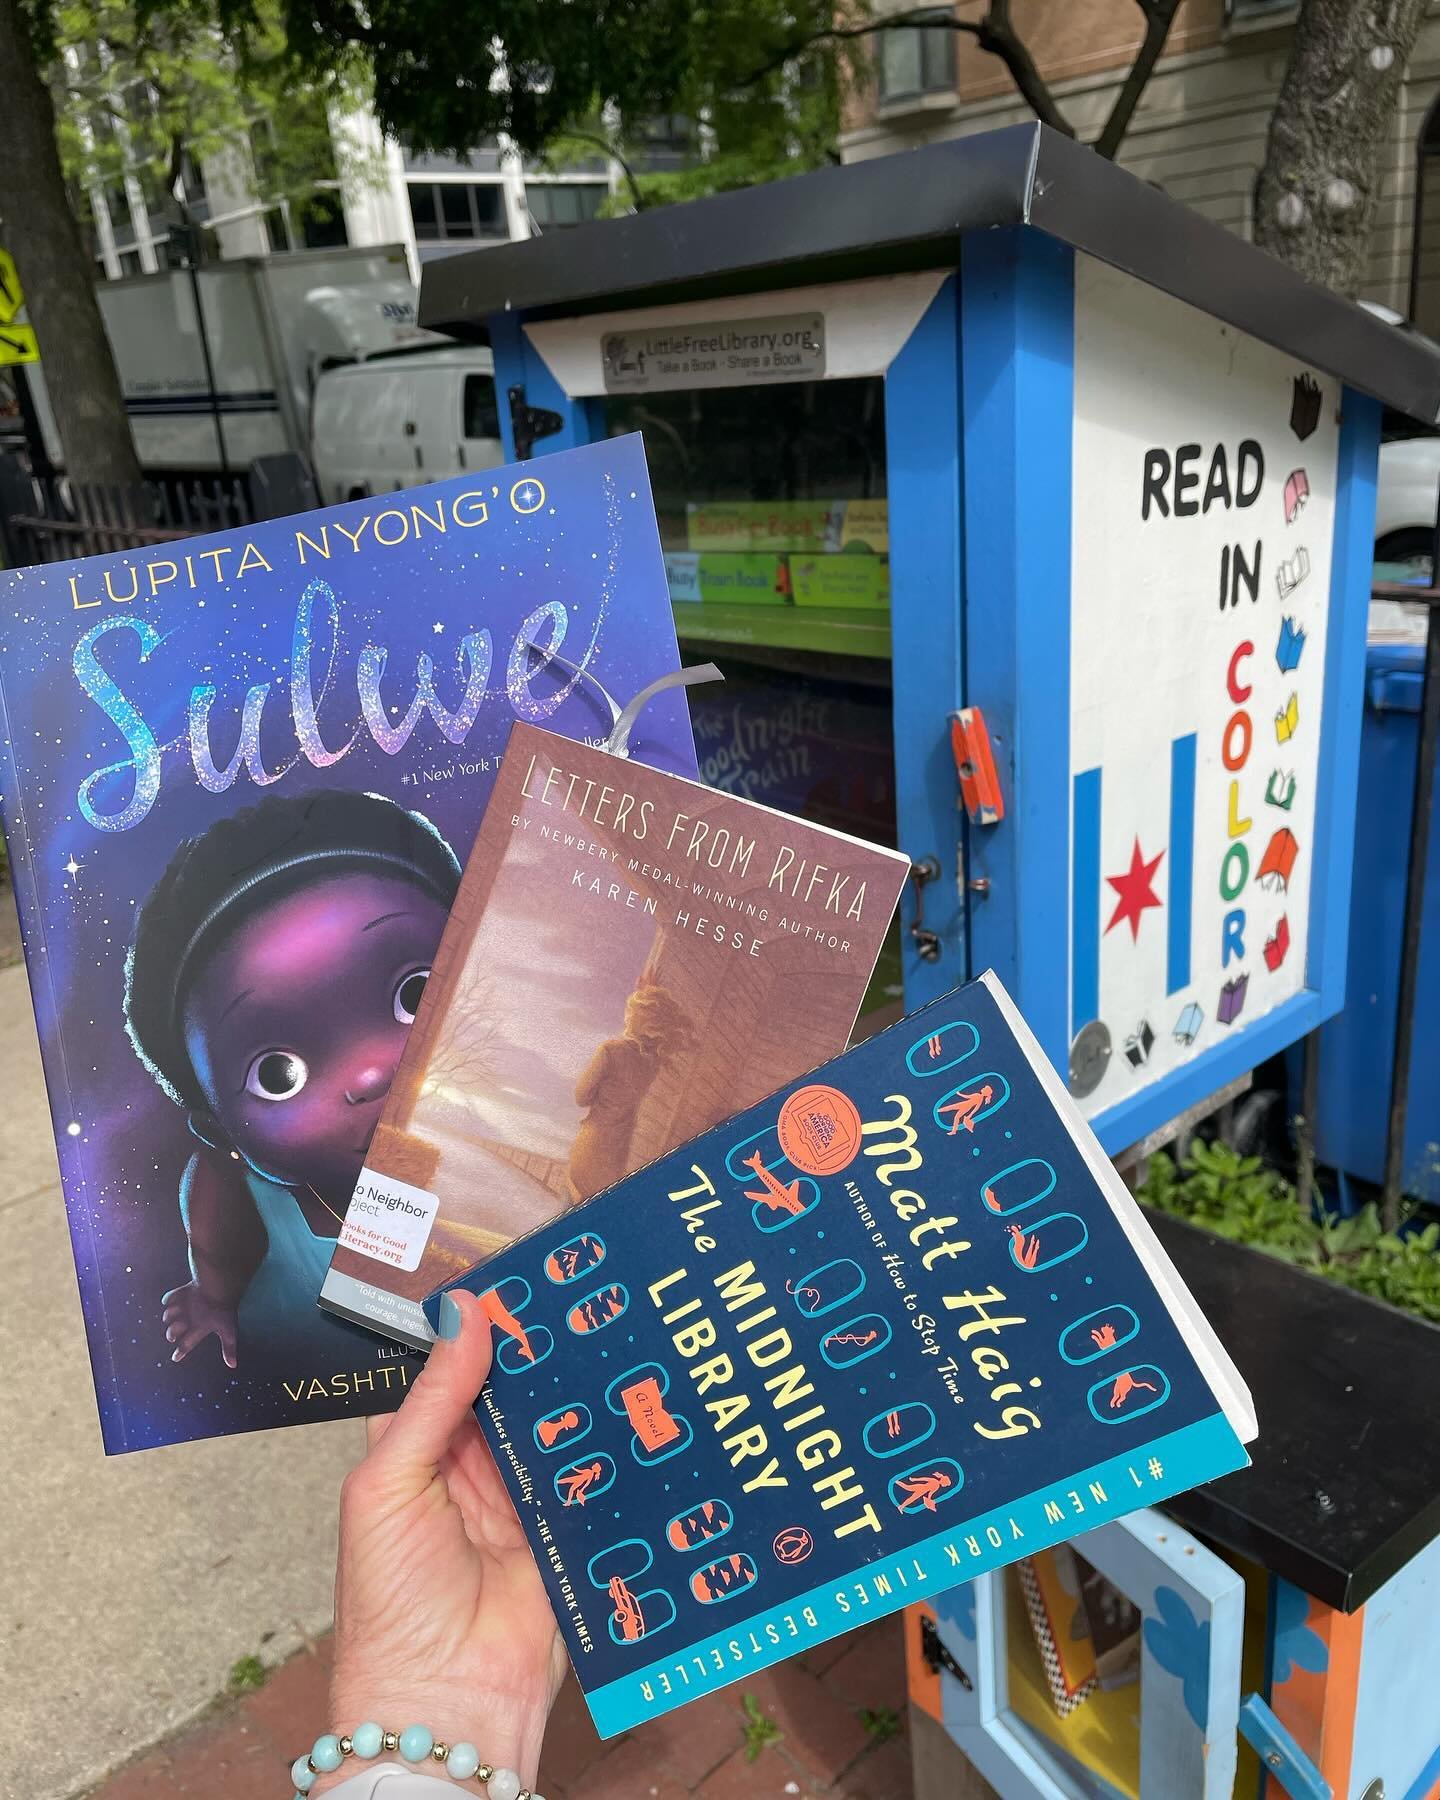 Happy 12th Birthday Little Free Library!
Did you know today marks 12 years since this book sharing movement started by the late Todd H Bol became a nonprofit with a mission of being a catalyst for Building Community, Inspiring Readers, and Expanding 